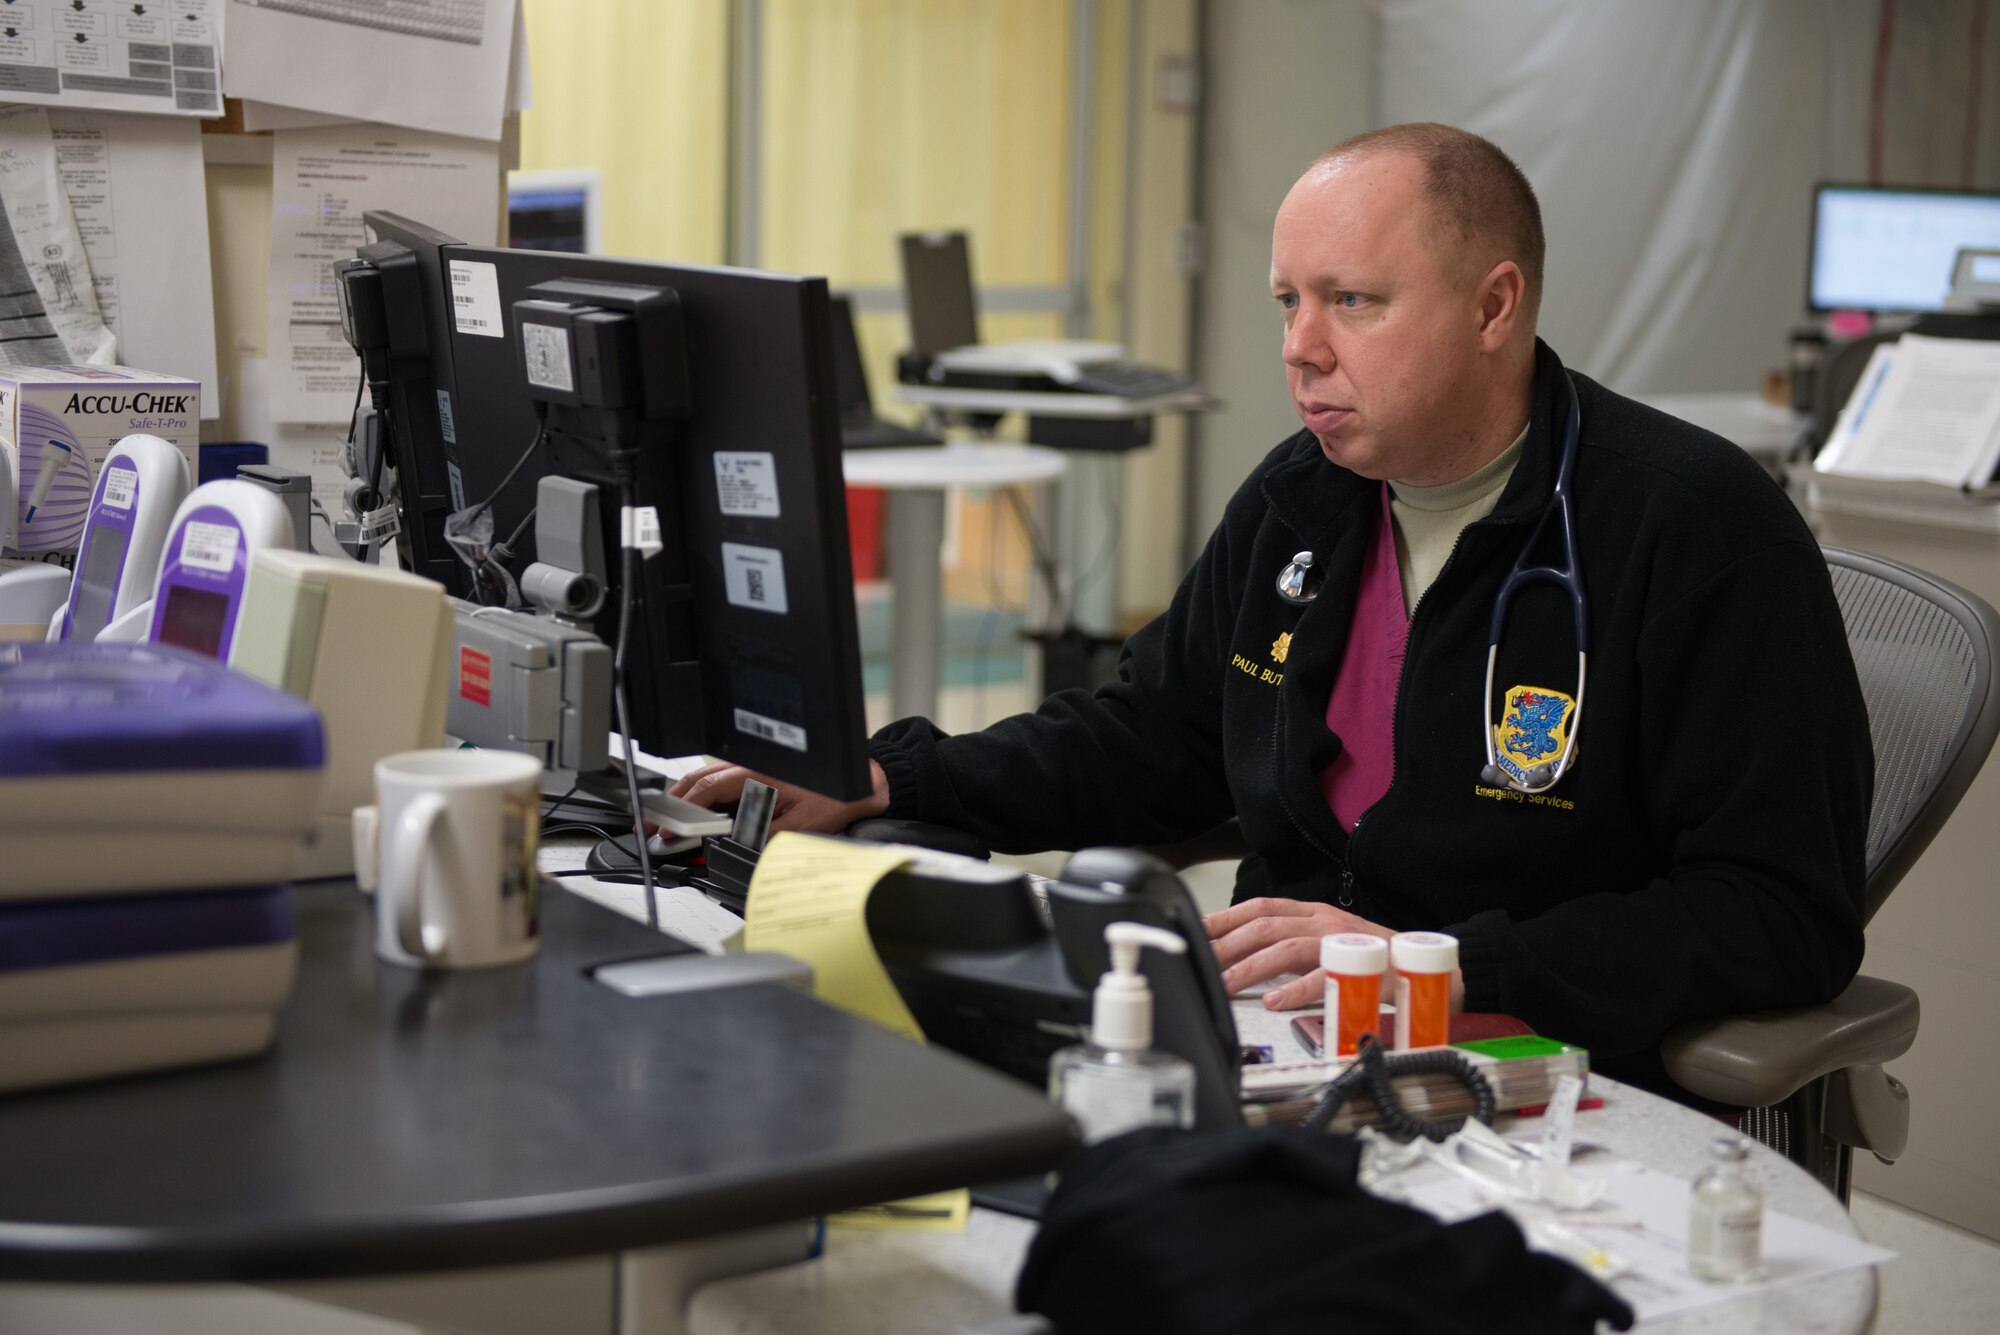 Maj. (Dr.) Paul Butts, 81st Medical Operations Squadron physician, updates patient records in the emergency services department at the Keesler Medical Center July 1, 2016, on Keesler Air Force Base, Miss. Keesler’s emergency room, which is open 24/7, sees around 2,000 patients monthly and is one of several clinics in the medical center. (U.S. Air Force photo by Marie Floyd/Released)